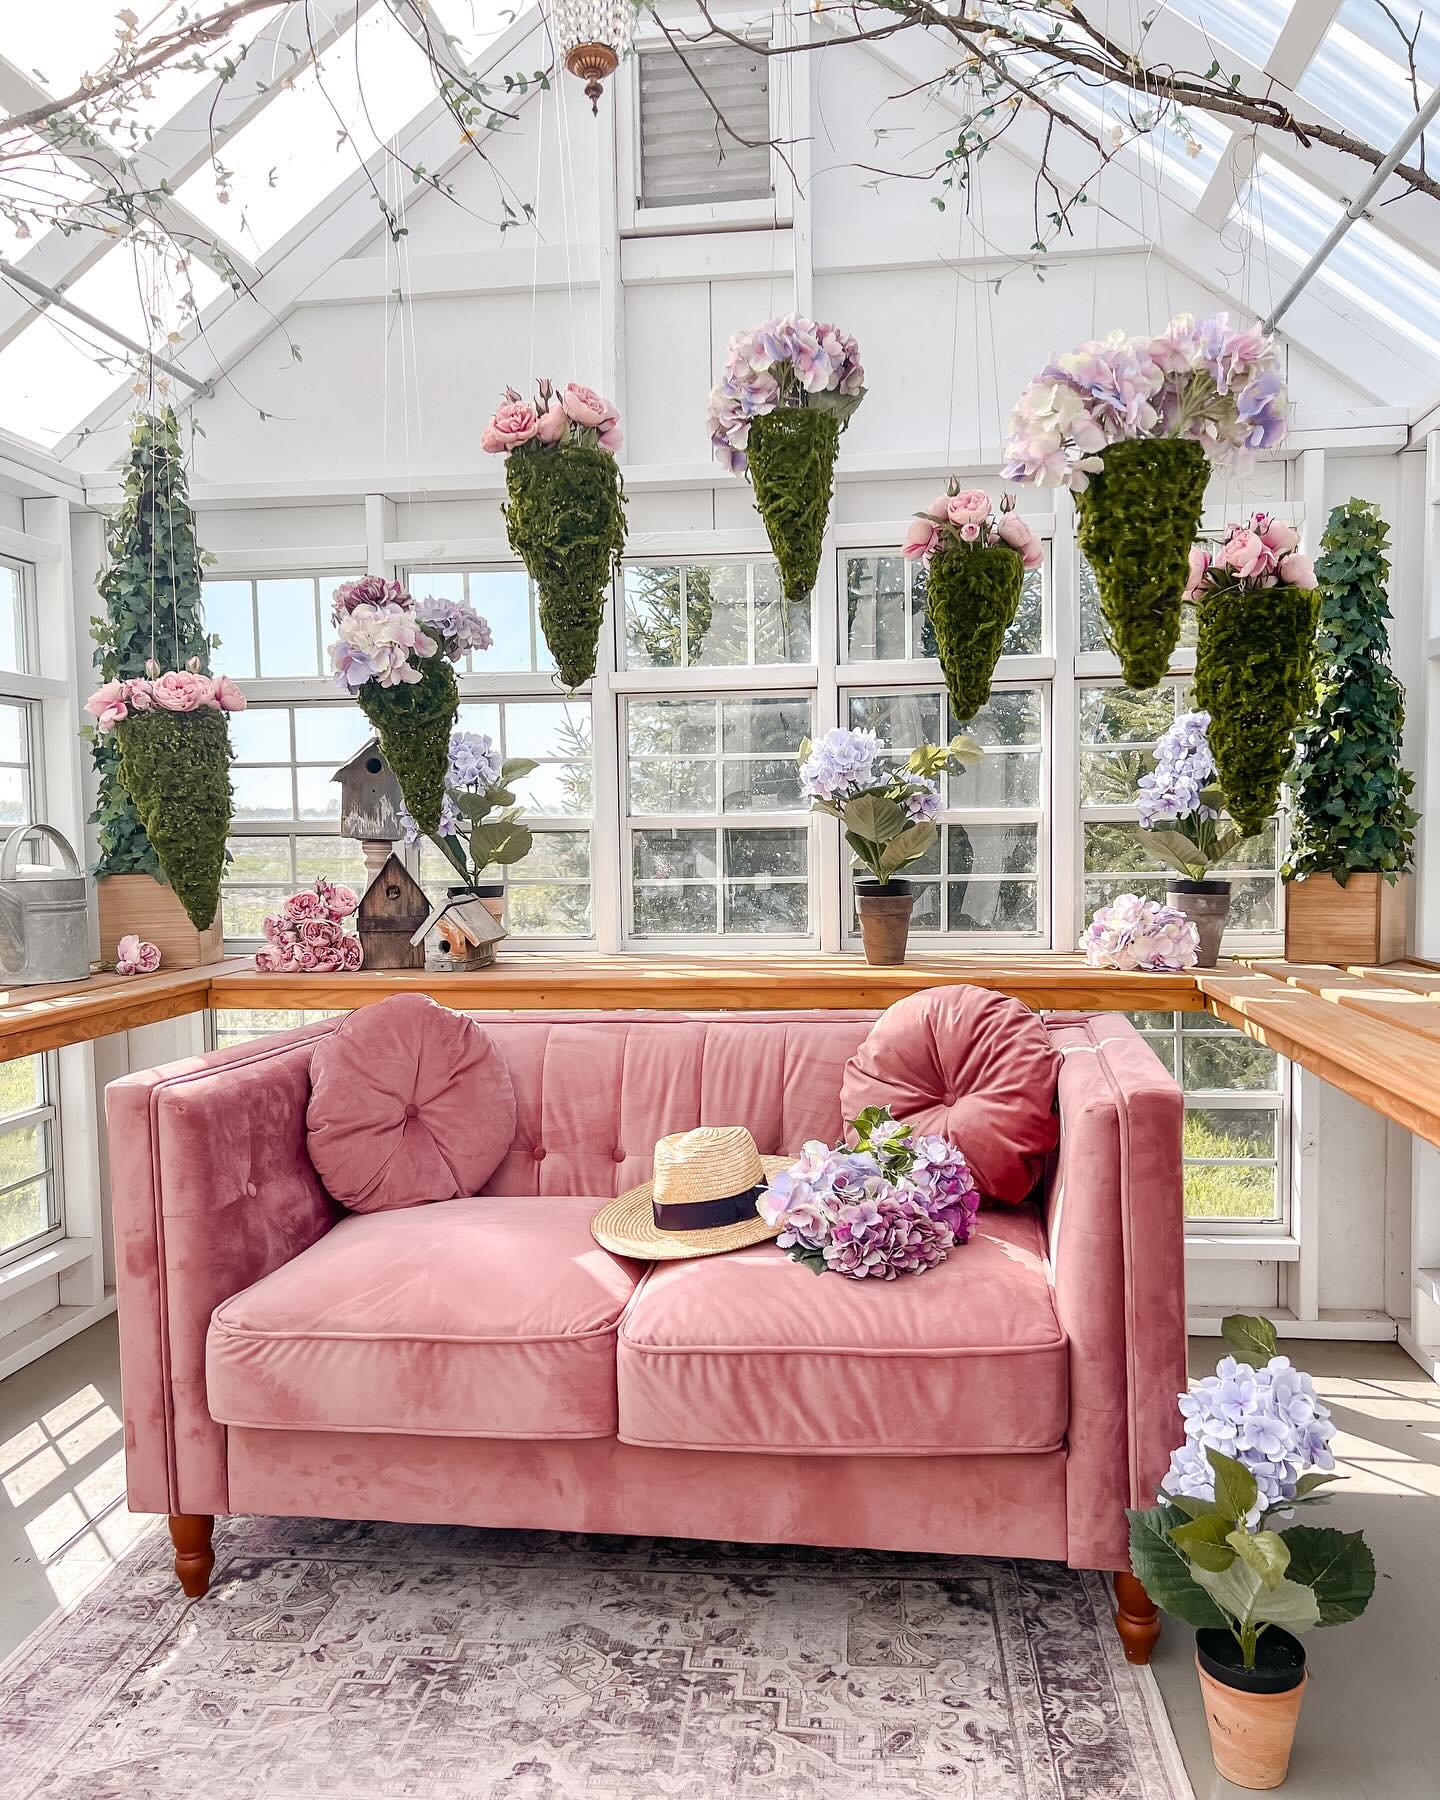 Back by popular demand! 
The pink sofa is back in the greenhouse and it&rsquo;s filled with roses and hydrangeas!
Let us know if you want some time&hellip;
Perfect for Mother&rsquo;s Day minis!